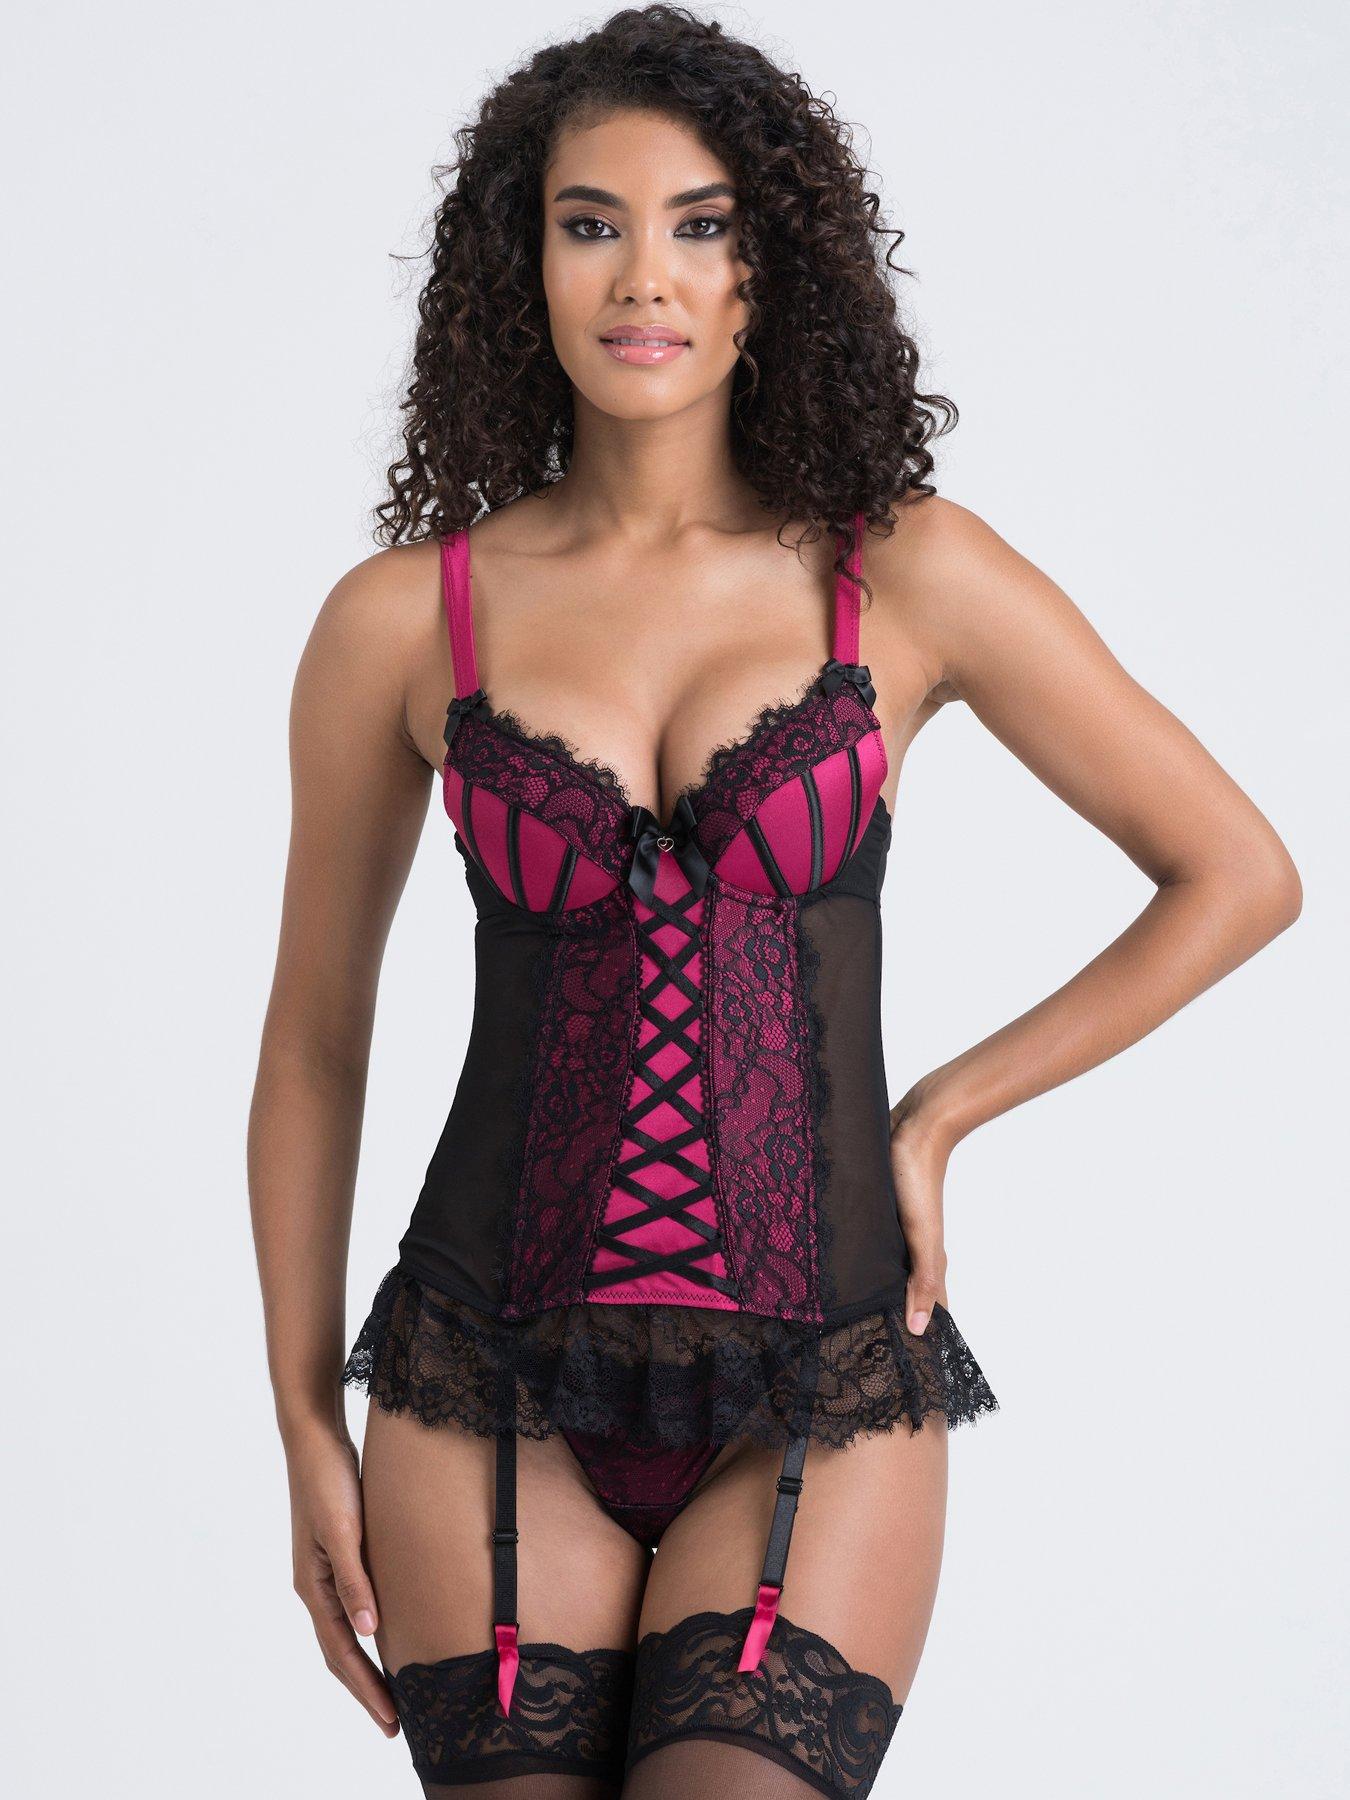 scicent Lingerie for Women Bodysuit Plus Size Basques with 4-Strap Suspender Belt and G-String Size UK 8 10 12 14 16 18 20 22 